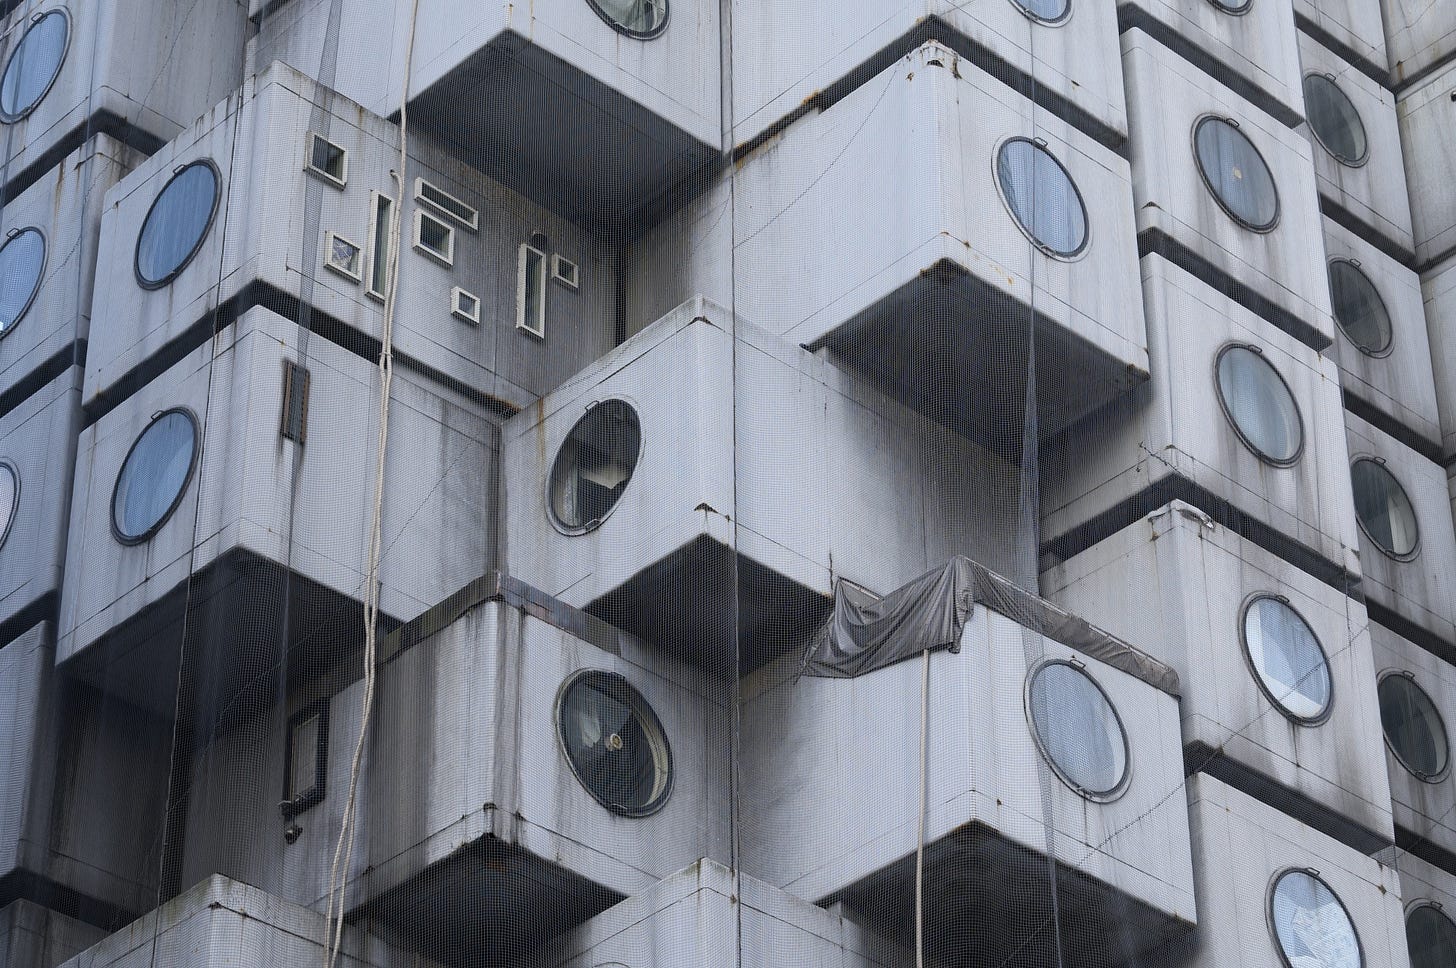 Tokyo's Architectural Icon Nakagin Capsule Tower To Be Torn Down - Bloomberg